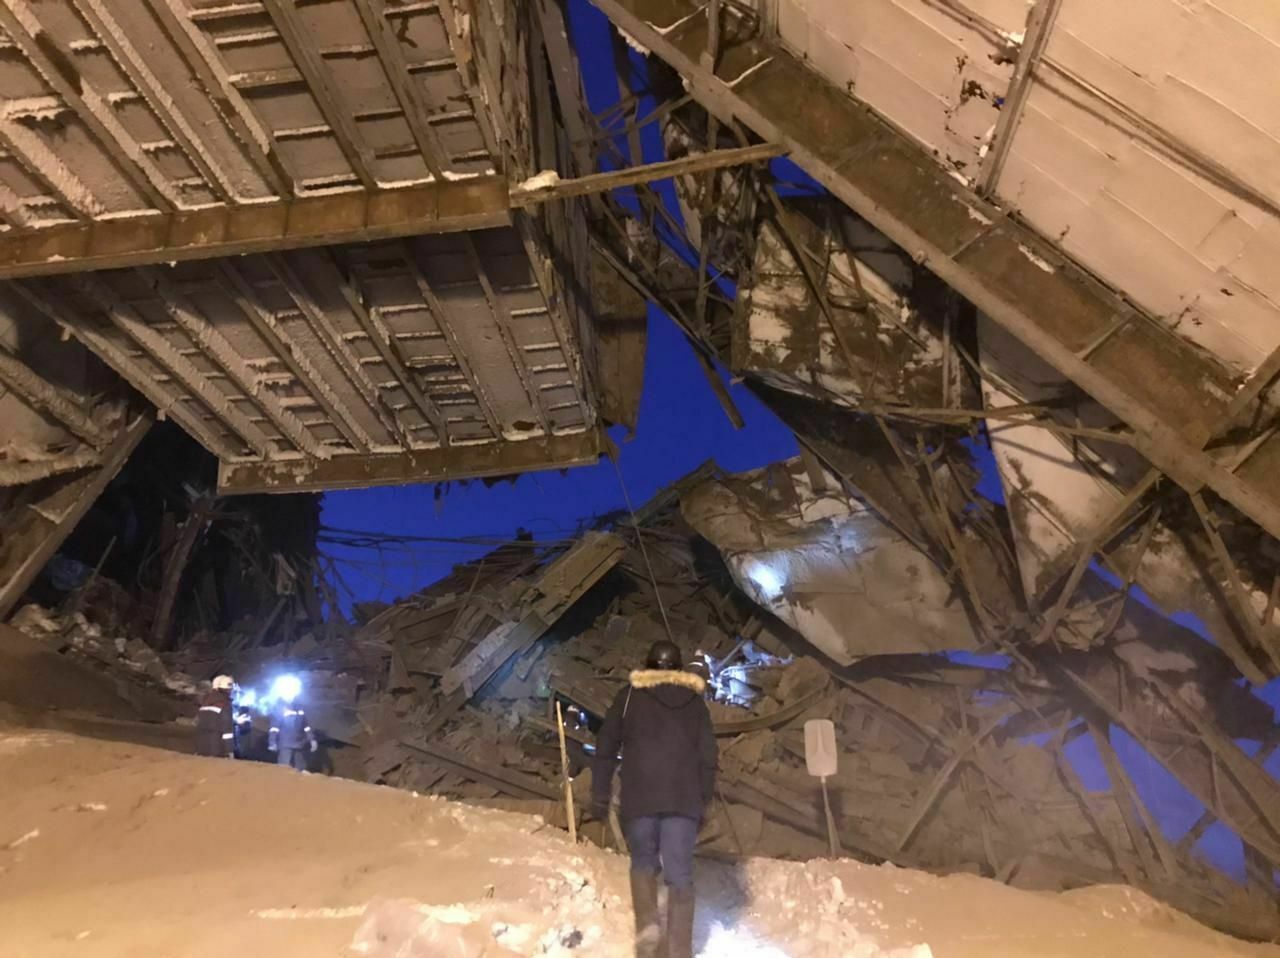 The collapse of the roof at the factory in Norilsk injured 6 people, one died